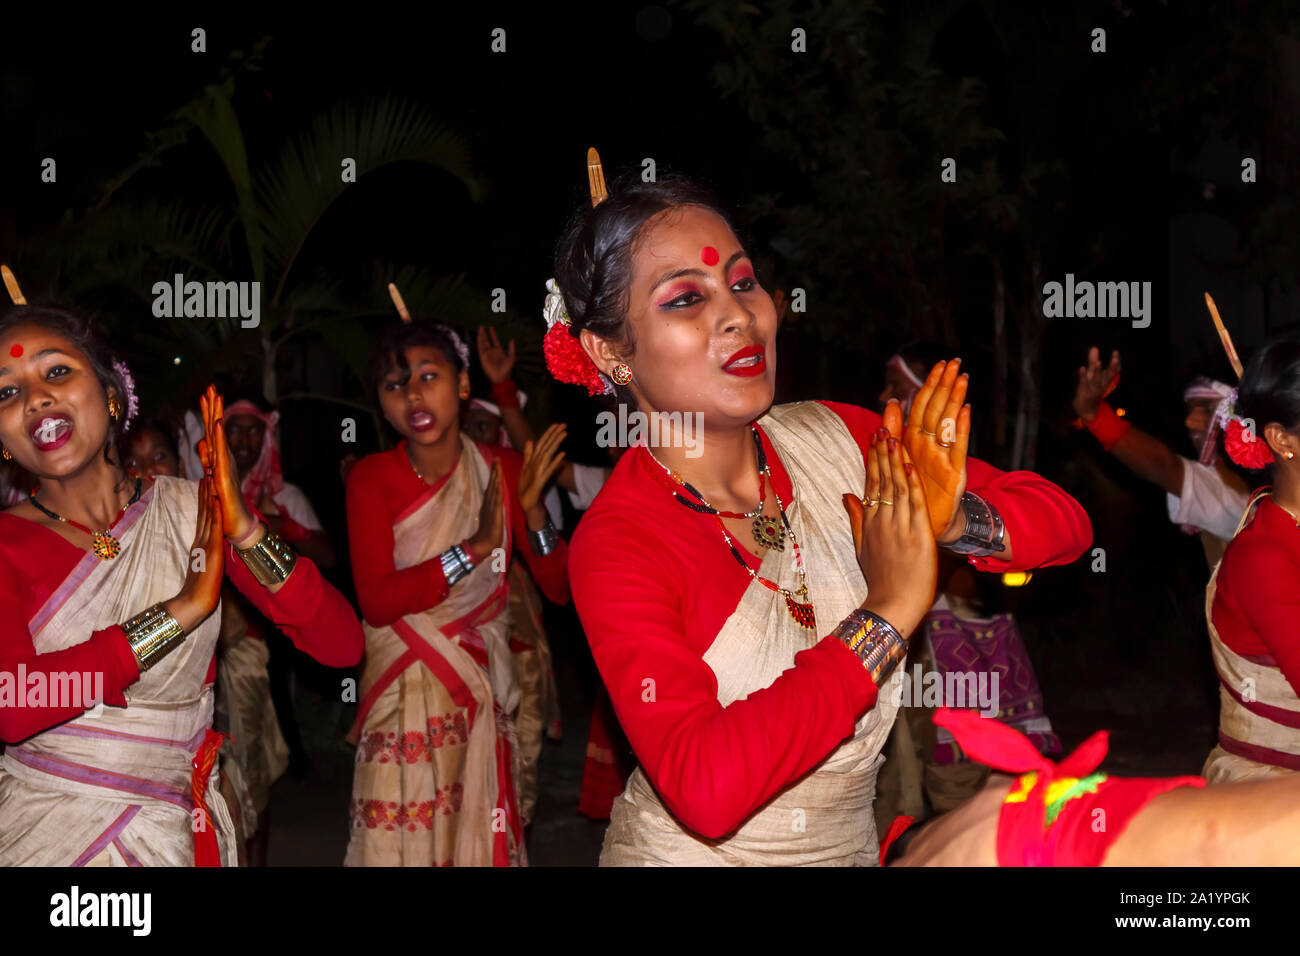 Smiling young local women dancers in traditional dress perform at an Indian New Year dance in Kaziranga, Golaghat District, Bochagaon, Assam, India Stock Photo